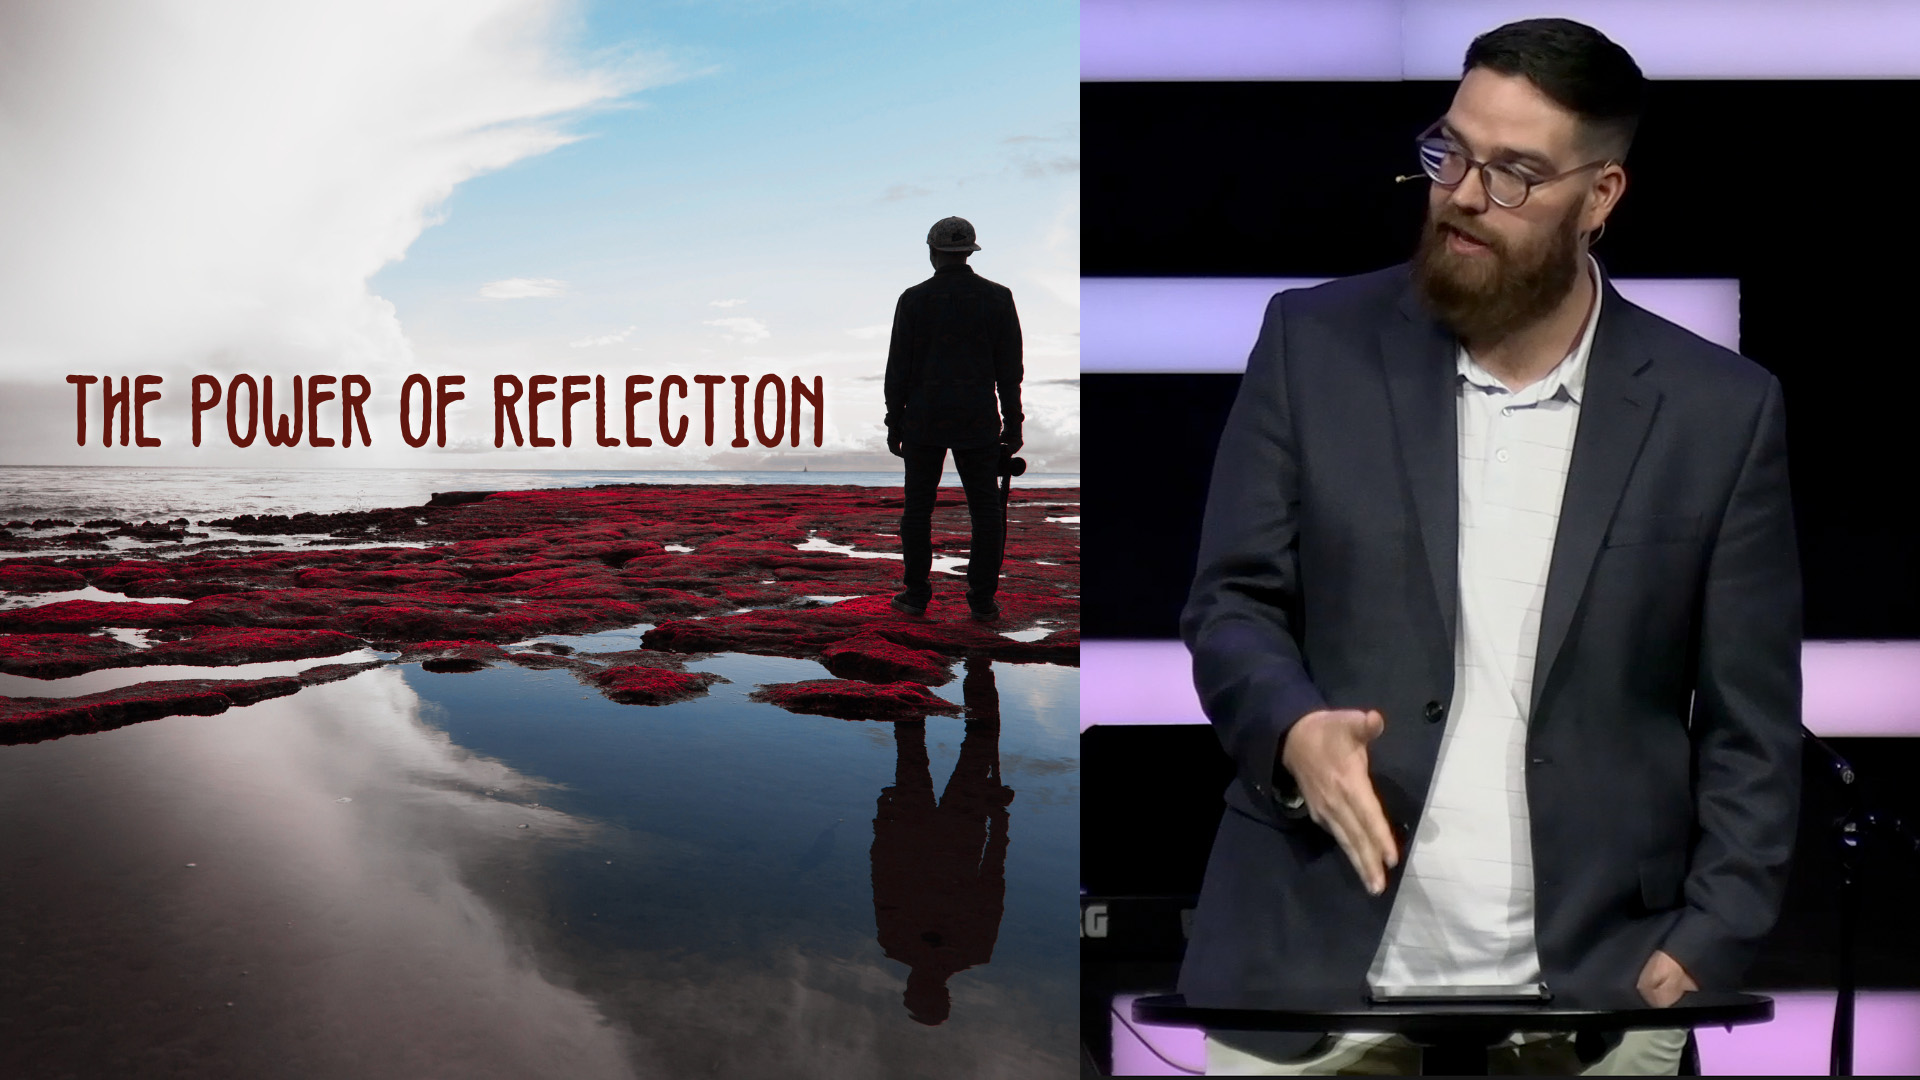 The Power of Reflection